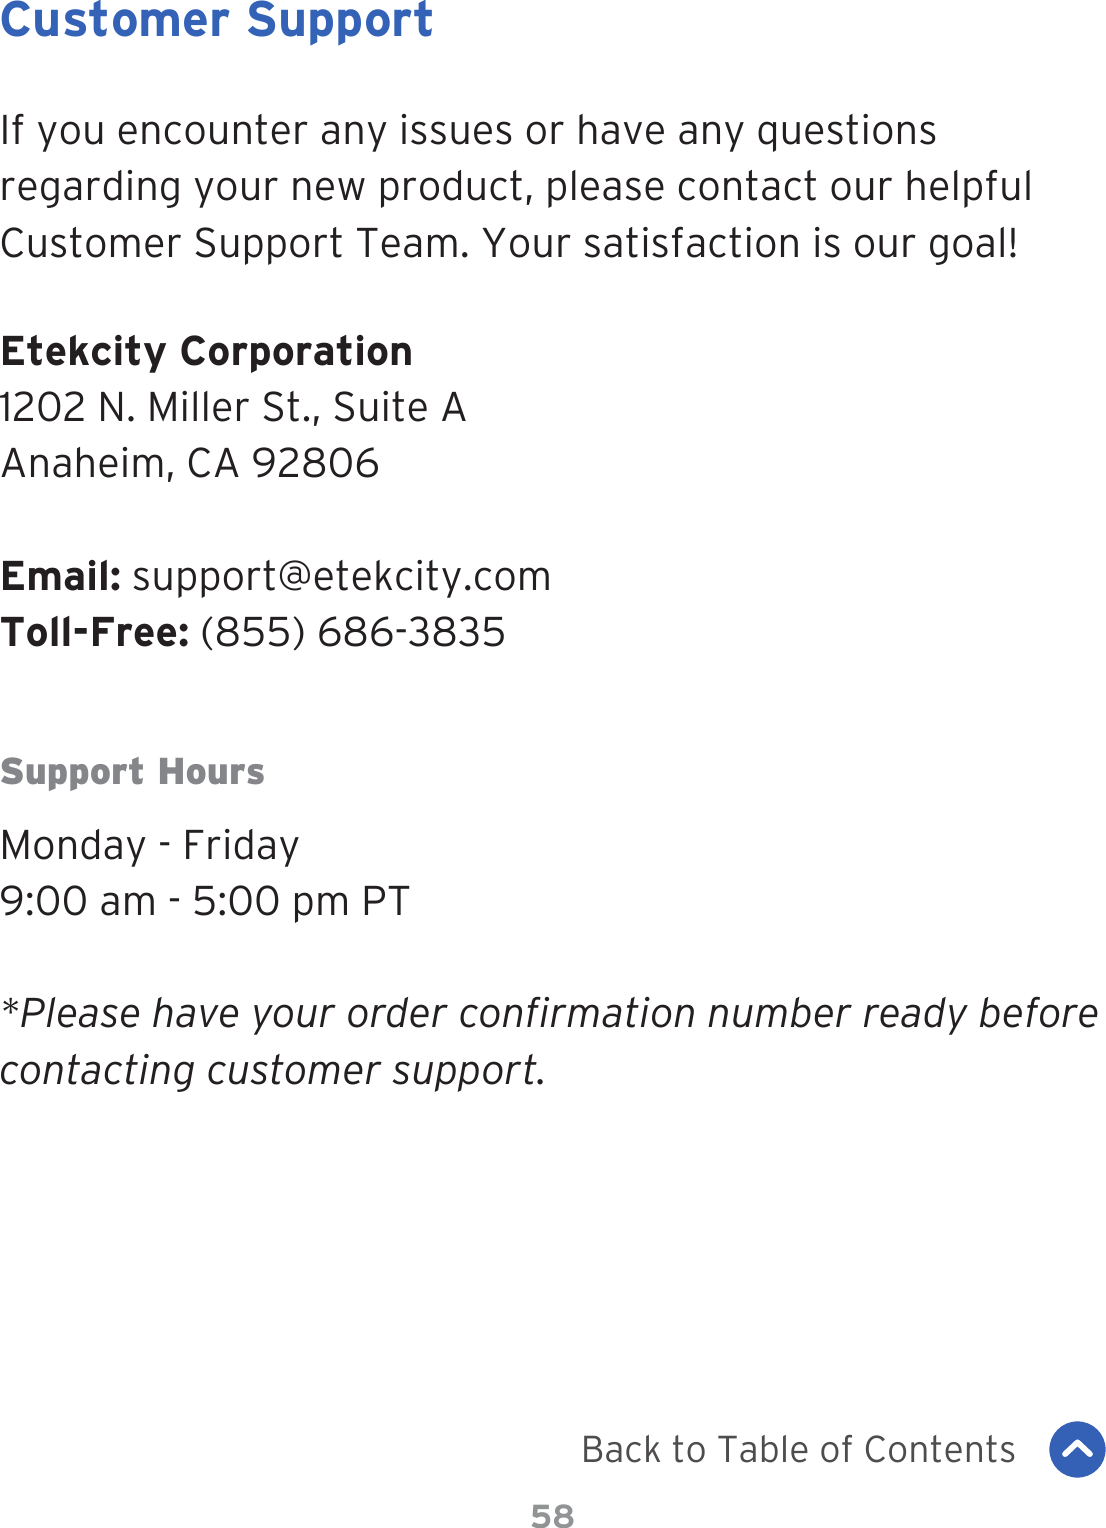 58Customer SupportIf you encounter any issues or have any questions regarding your new product, please contact our helpful Customer Support Team. Your satisfaction is our goal!Etekcity Corporation1202 N. Miller St., Suite AAnaheim, CA 92806Email: support@etekcity.comToll-Free: (855) 686-3835Support HoursMonday - Friday9:00 am - 5:00 pm PT*Please have your order confirmation number ready before contacting customer support.Back to Table of Contents